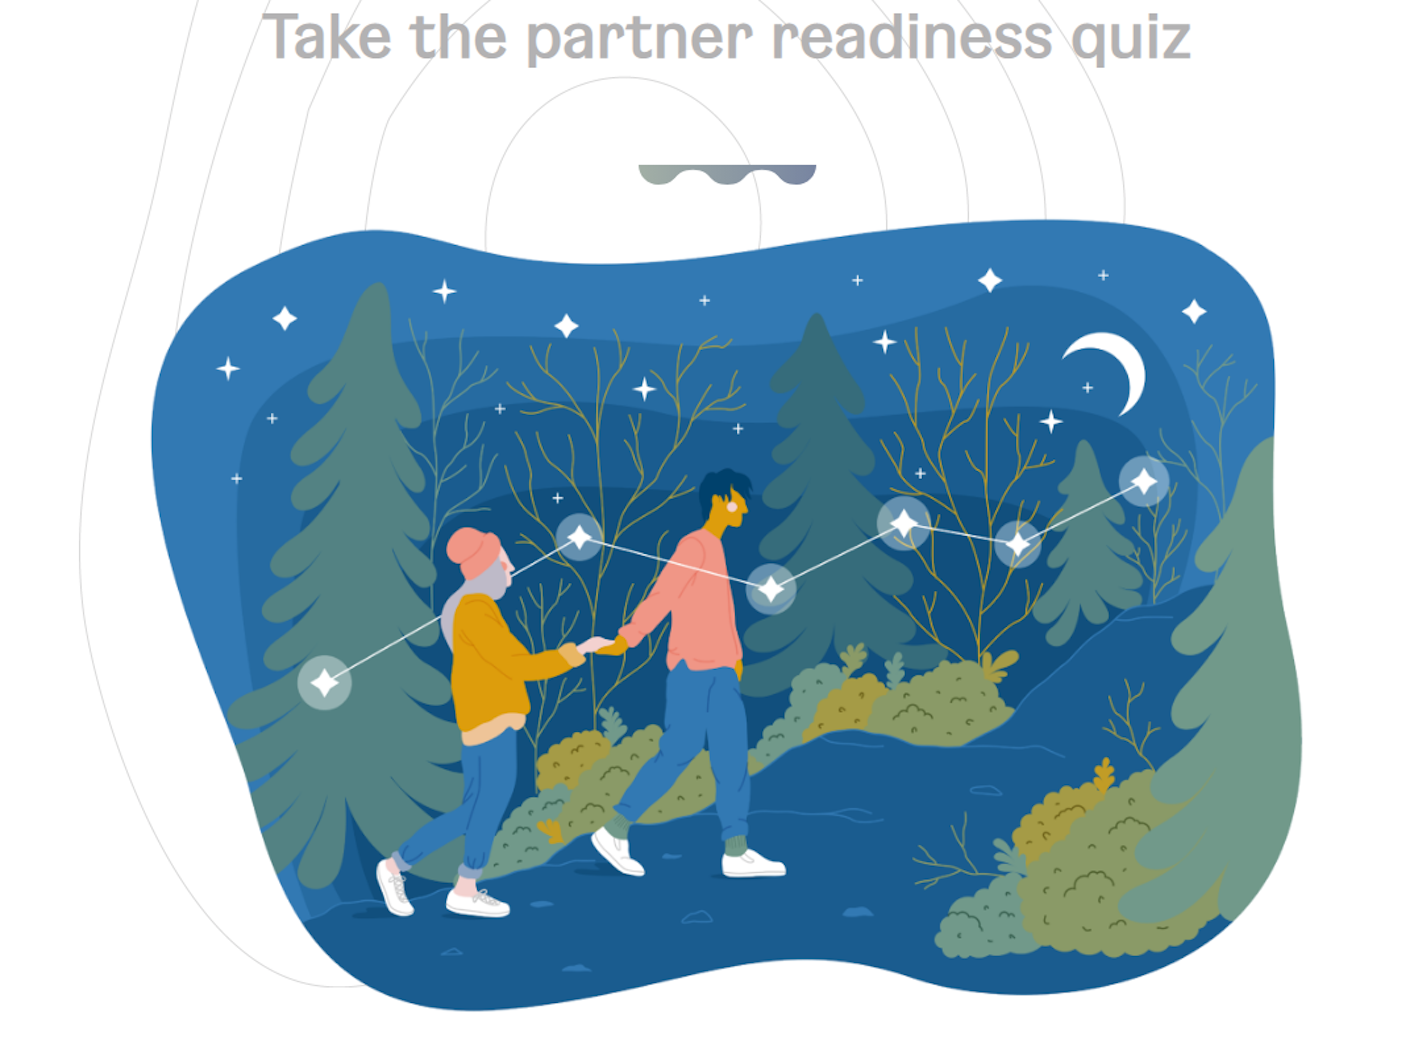 image for the readiness quiz